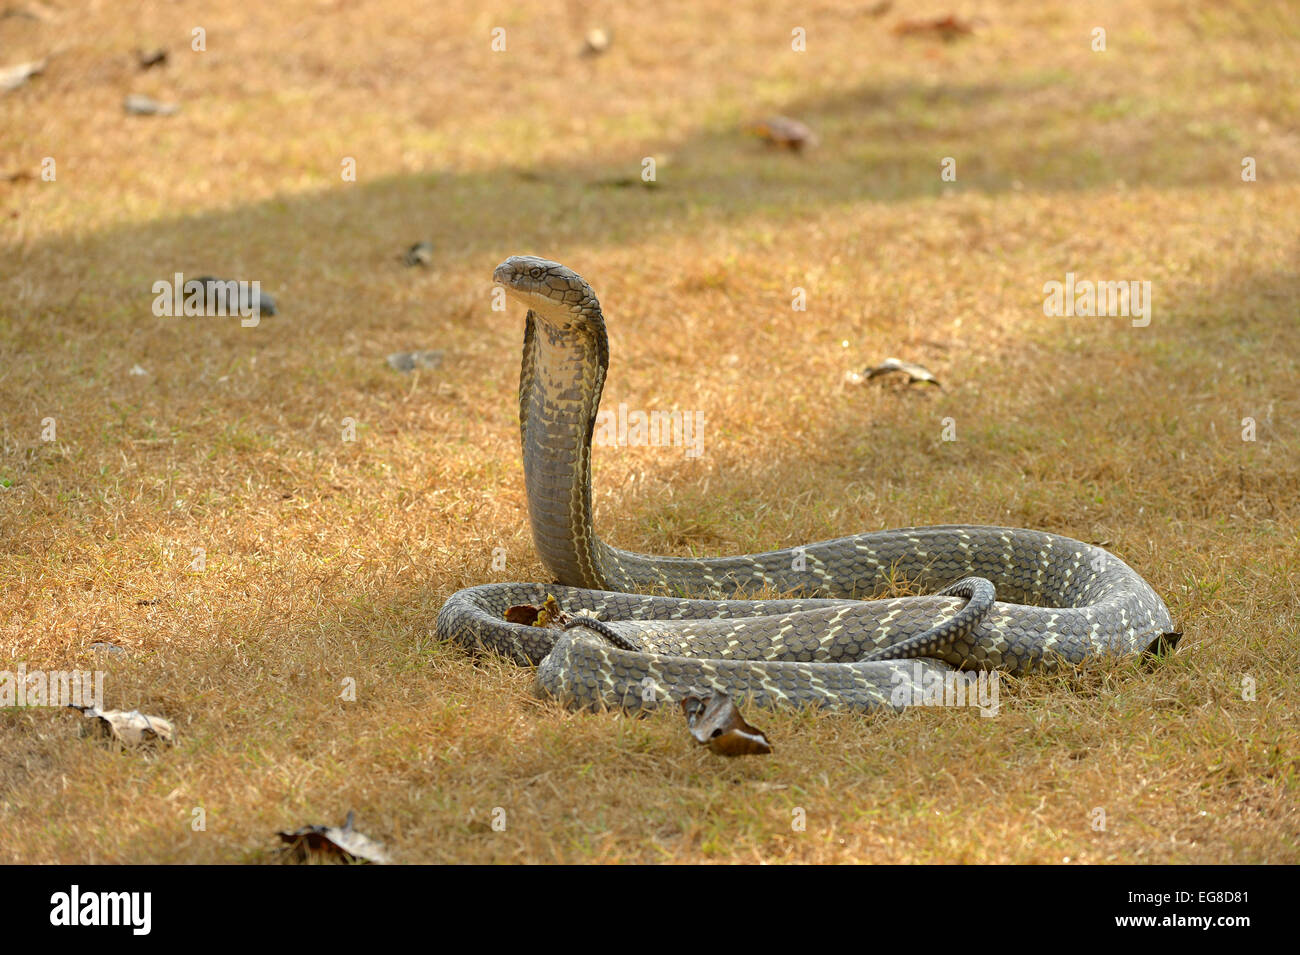 King Cobra (Ophiophagus hannah) on ground with head and neck raised in threat posture, Bali, Indonesia, October Stock Photo